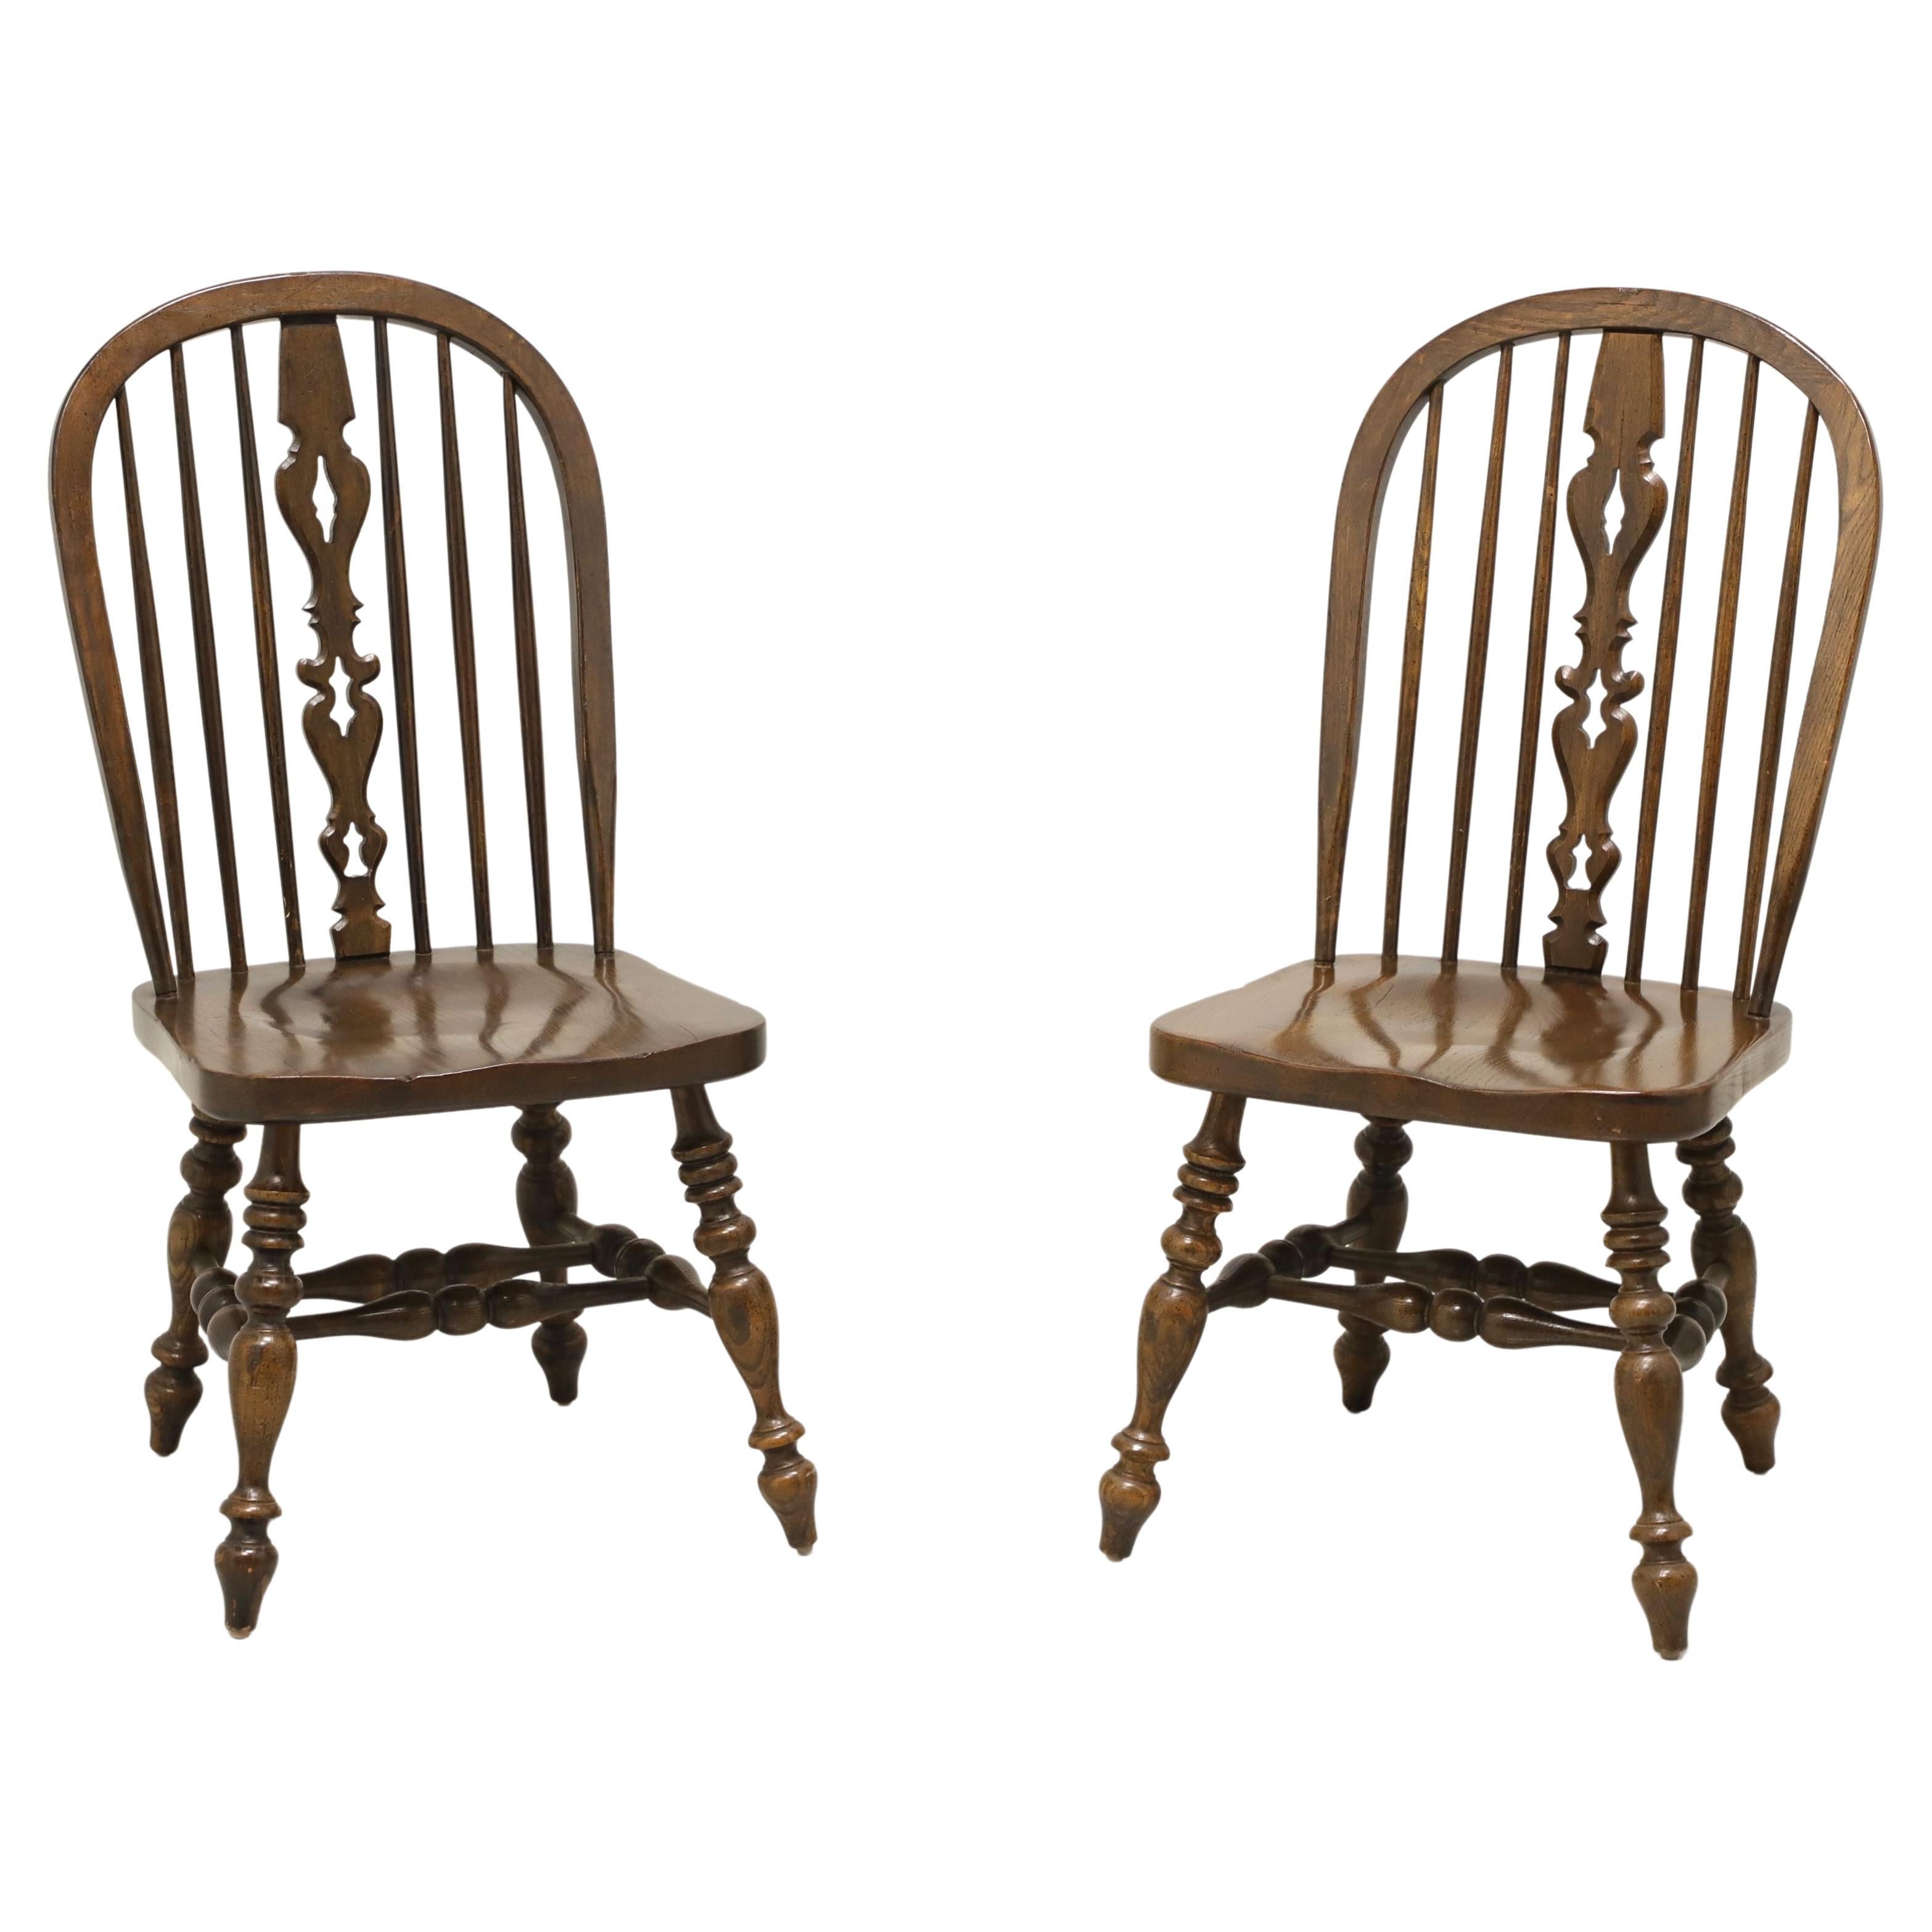 ETHAN ALLEN  Royal Charter Oak Bowback Windsor Dining Side Chairs - Pair B